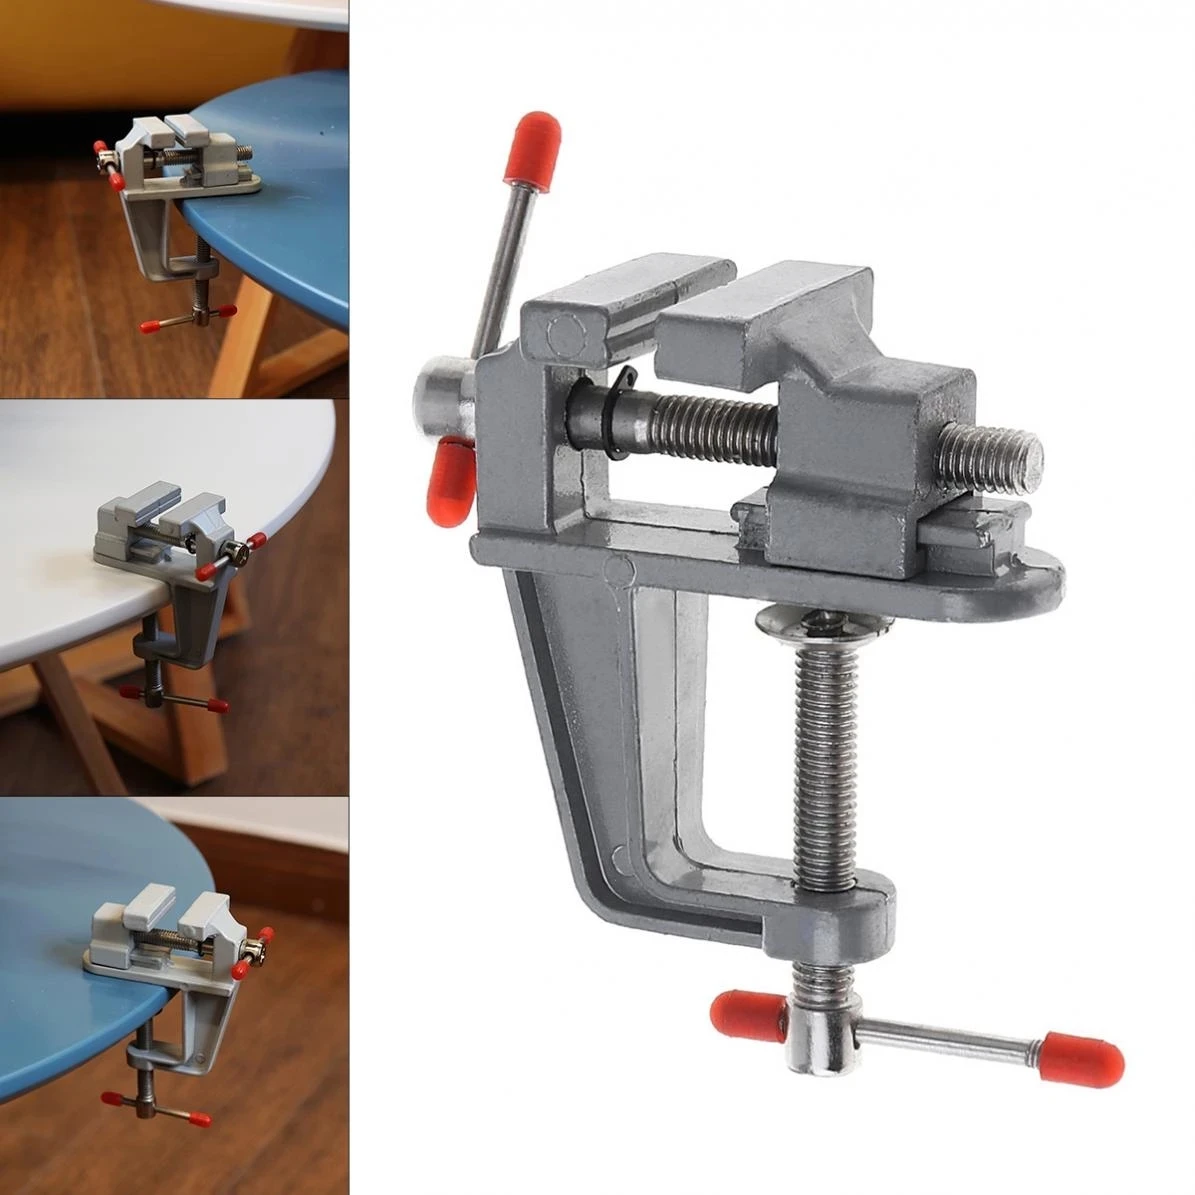 Household 40mm Aluminum Small Jewelers Hobby Clamp On Table Bench Vise Vice Tool 